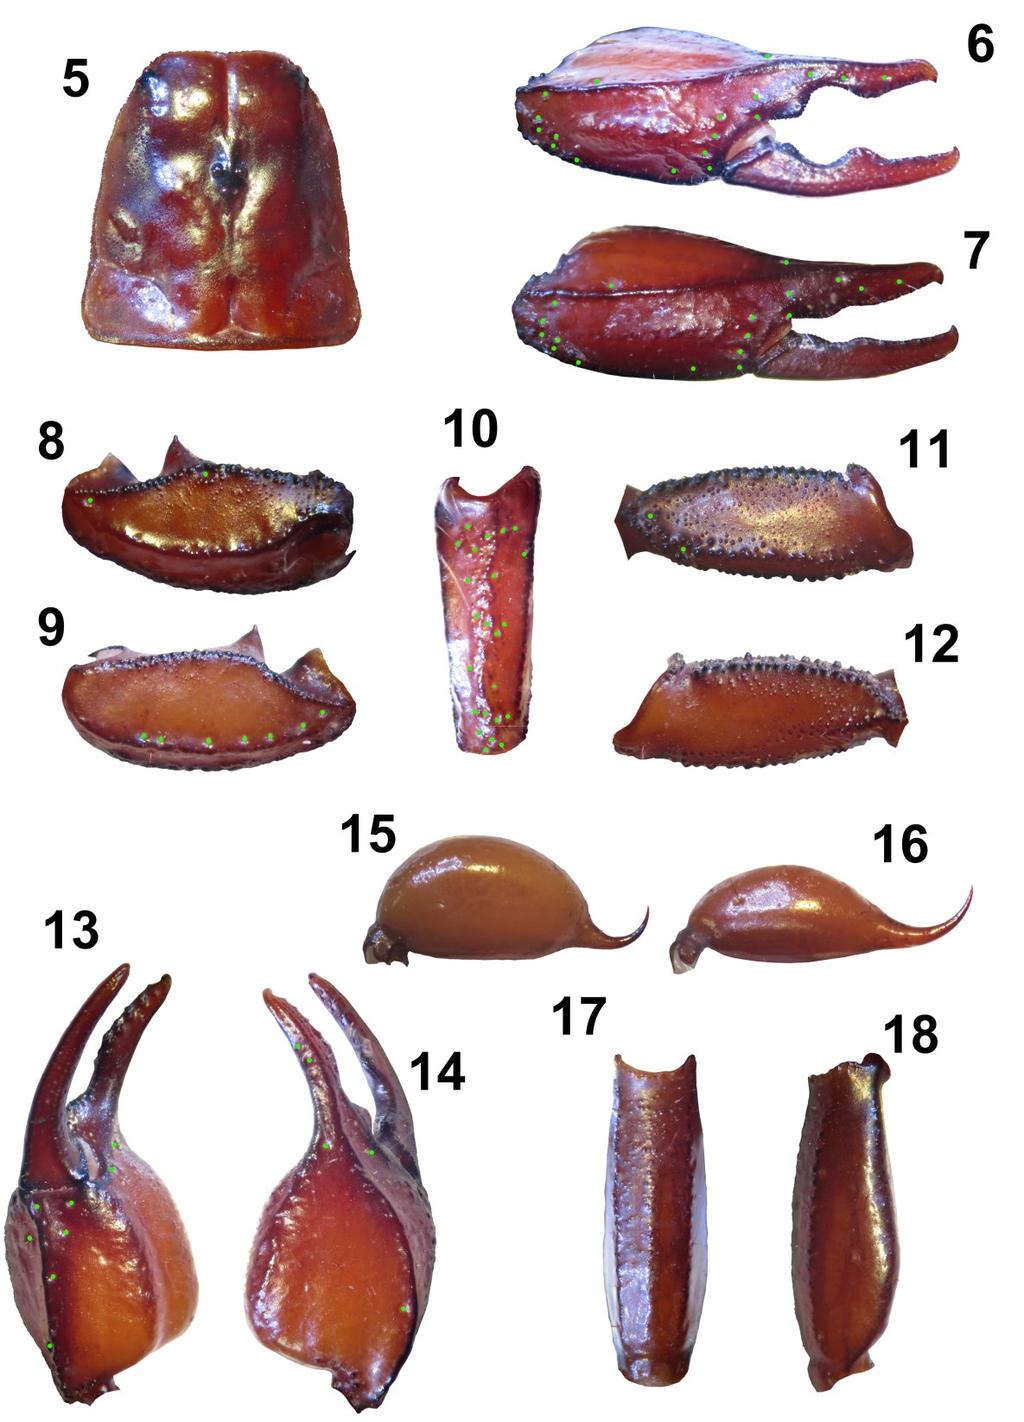 Tropea et al.: Three New Euscorpius From Greece 5 Figures 5 18: Euscorpius stahlavskyi sp. n. 5. Carapace. 6. External view of the chela of adult male. 7. External view of the chela of adult female.